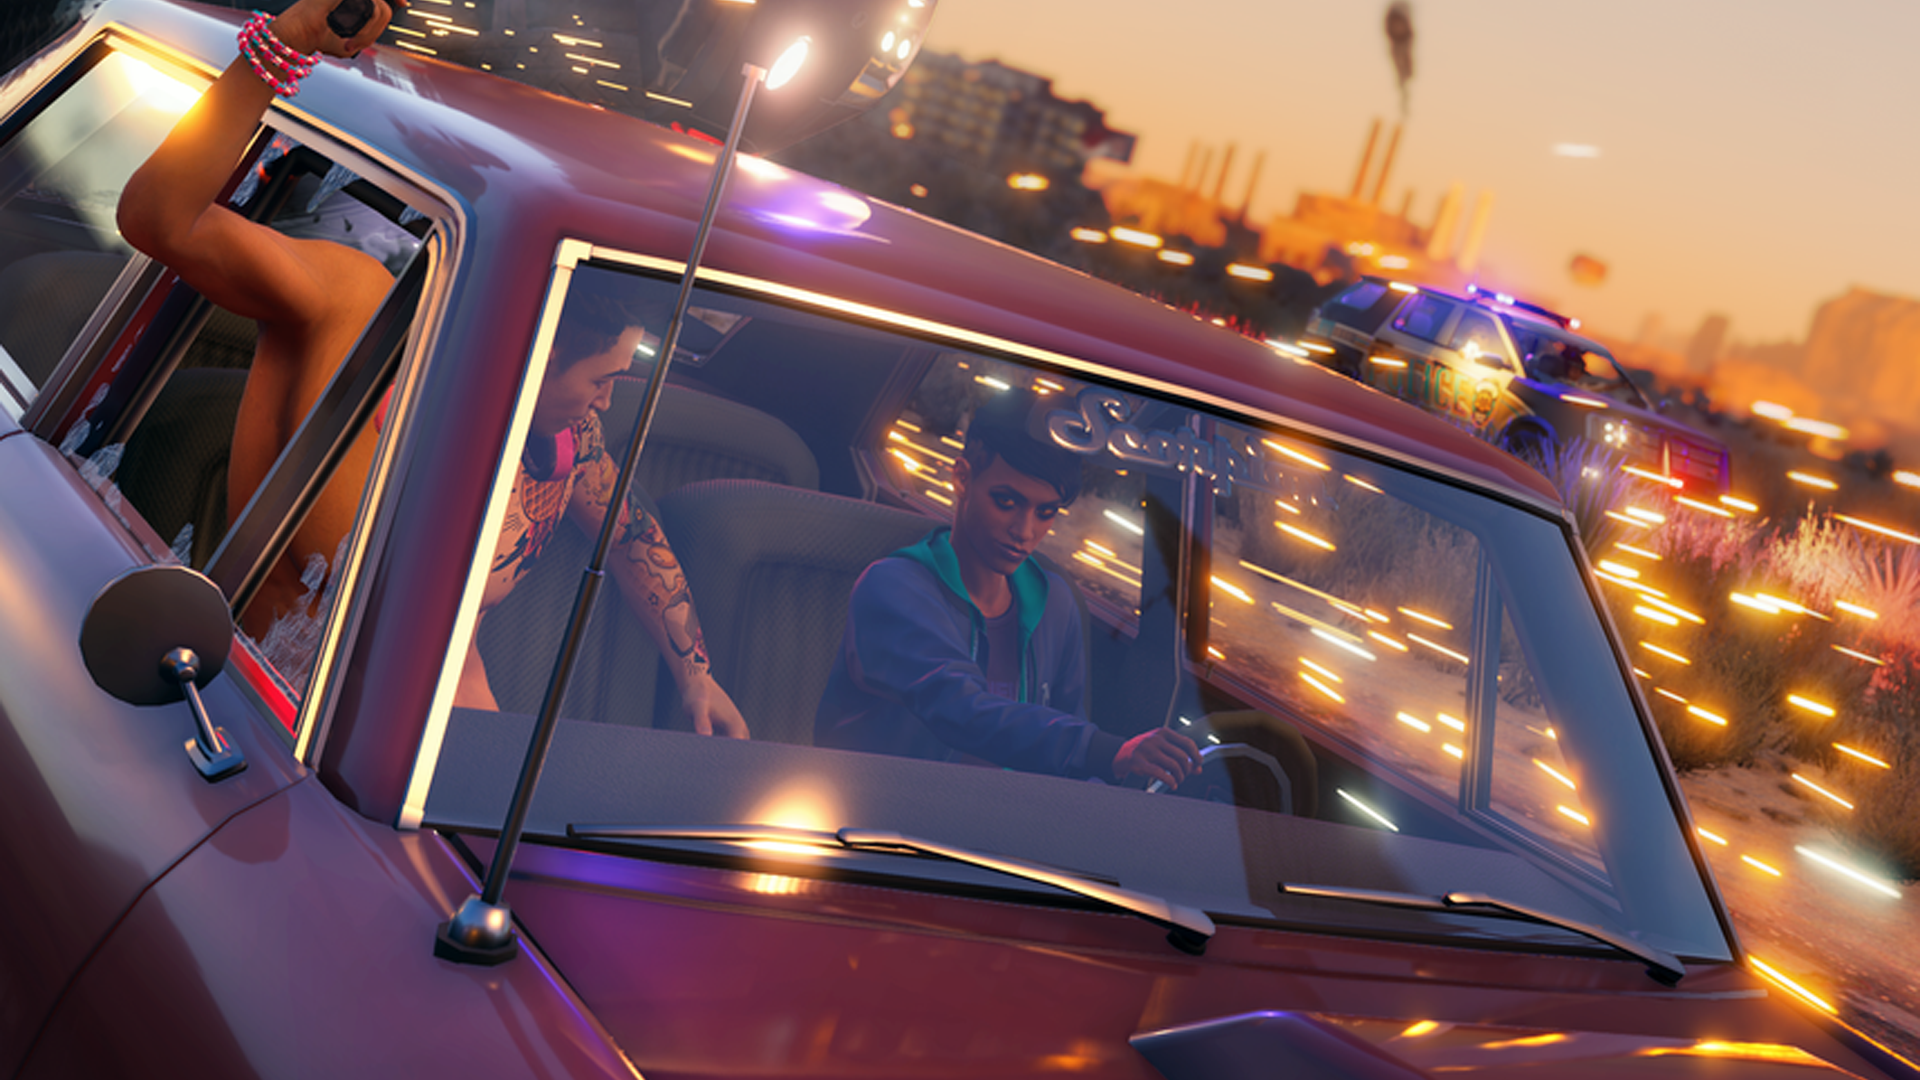 Saints Row reboot trailer, release date, gameplay and more